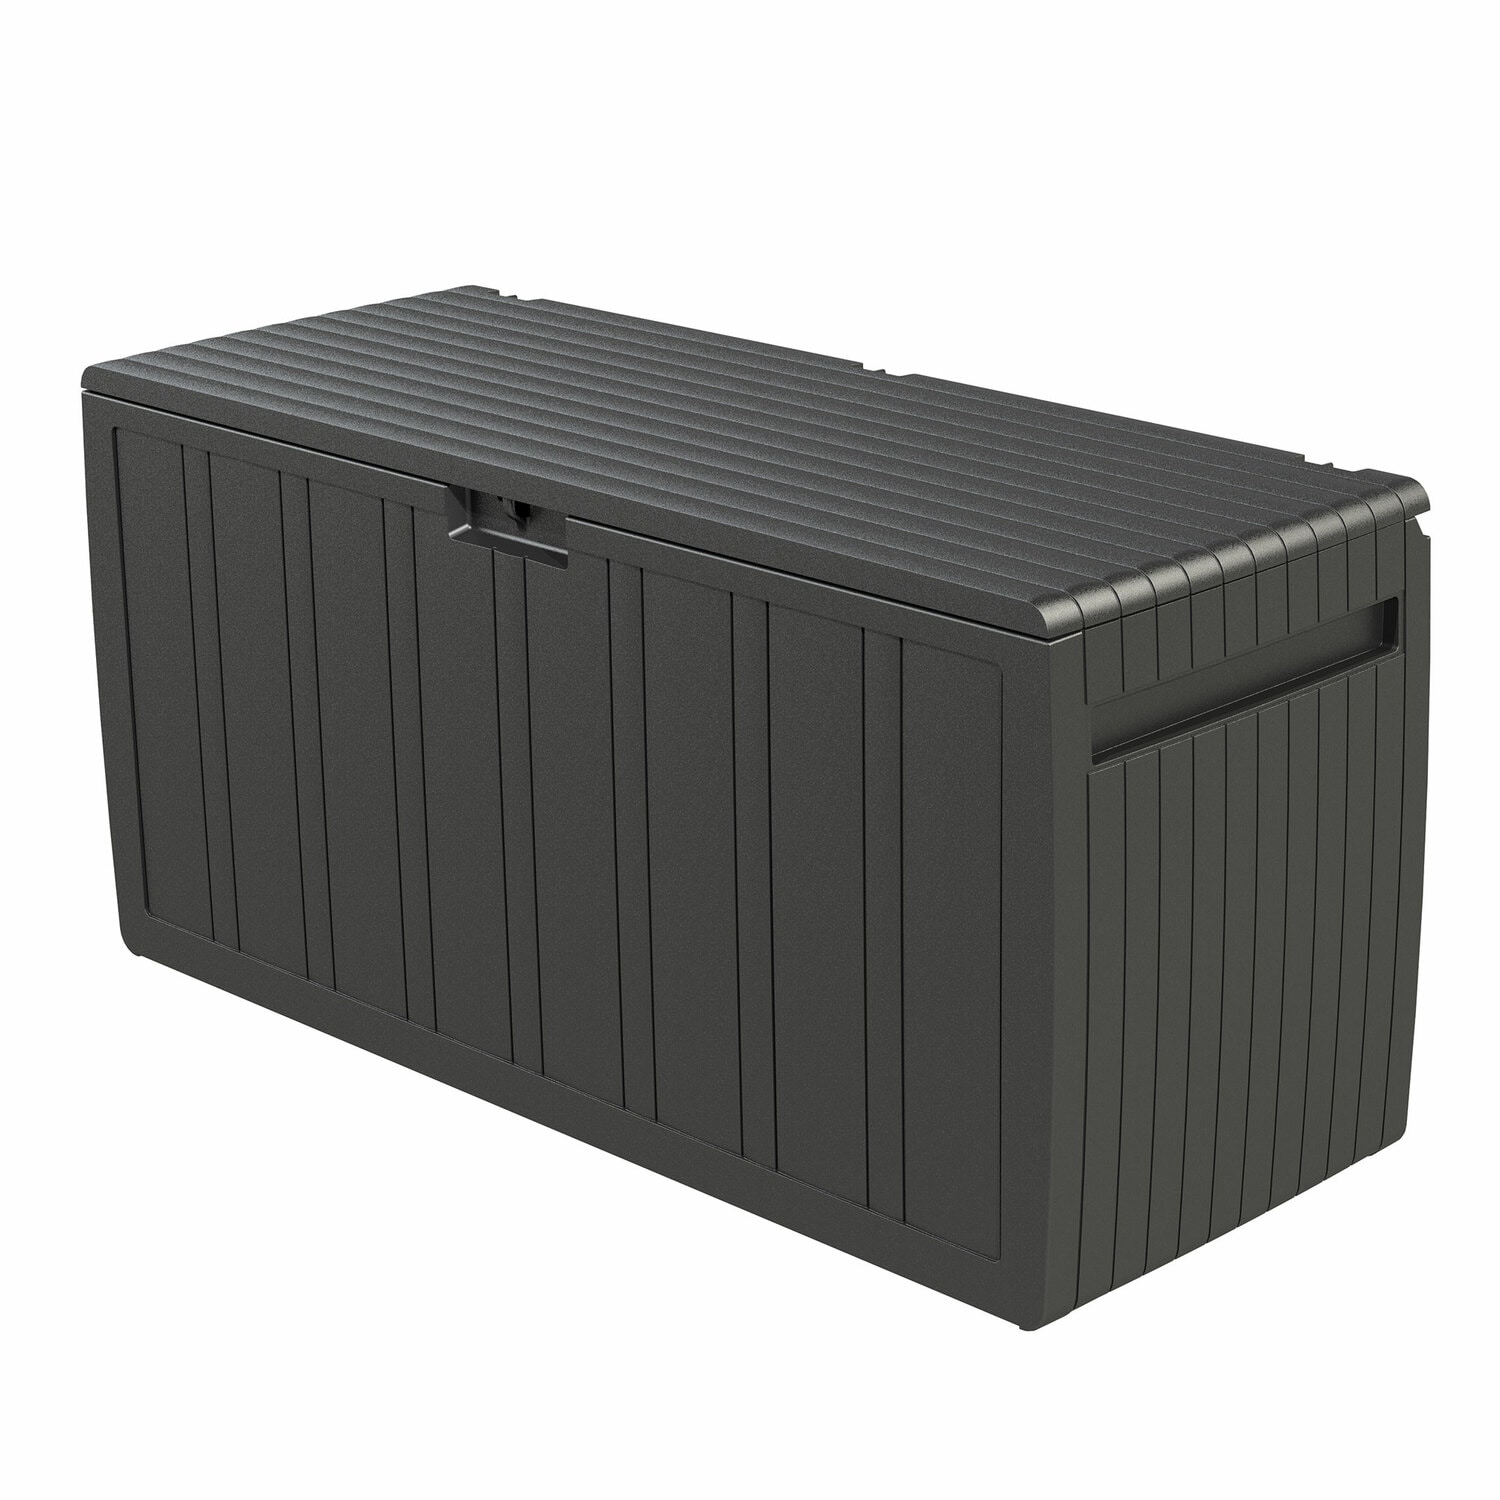 Keter Comfy 71 Gallon Durable Resin Outdoor Storage Deck Box For Furniture  and Supplies, Brown & Reviews